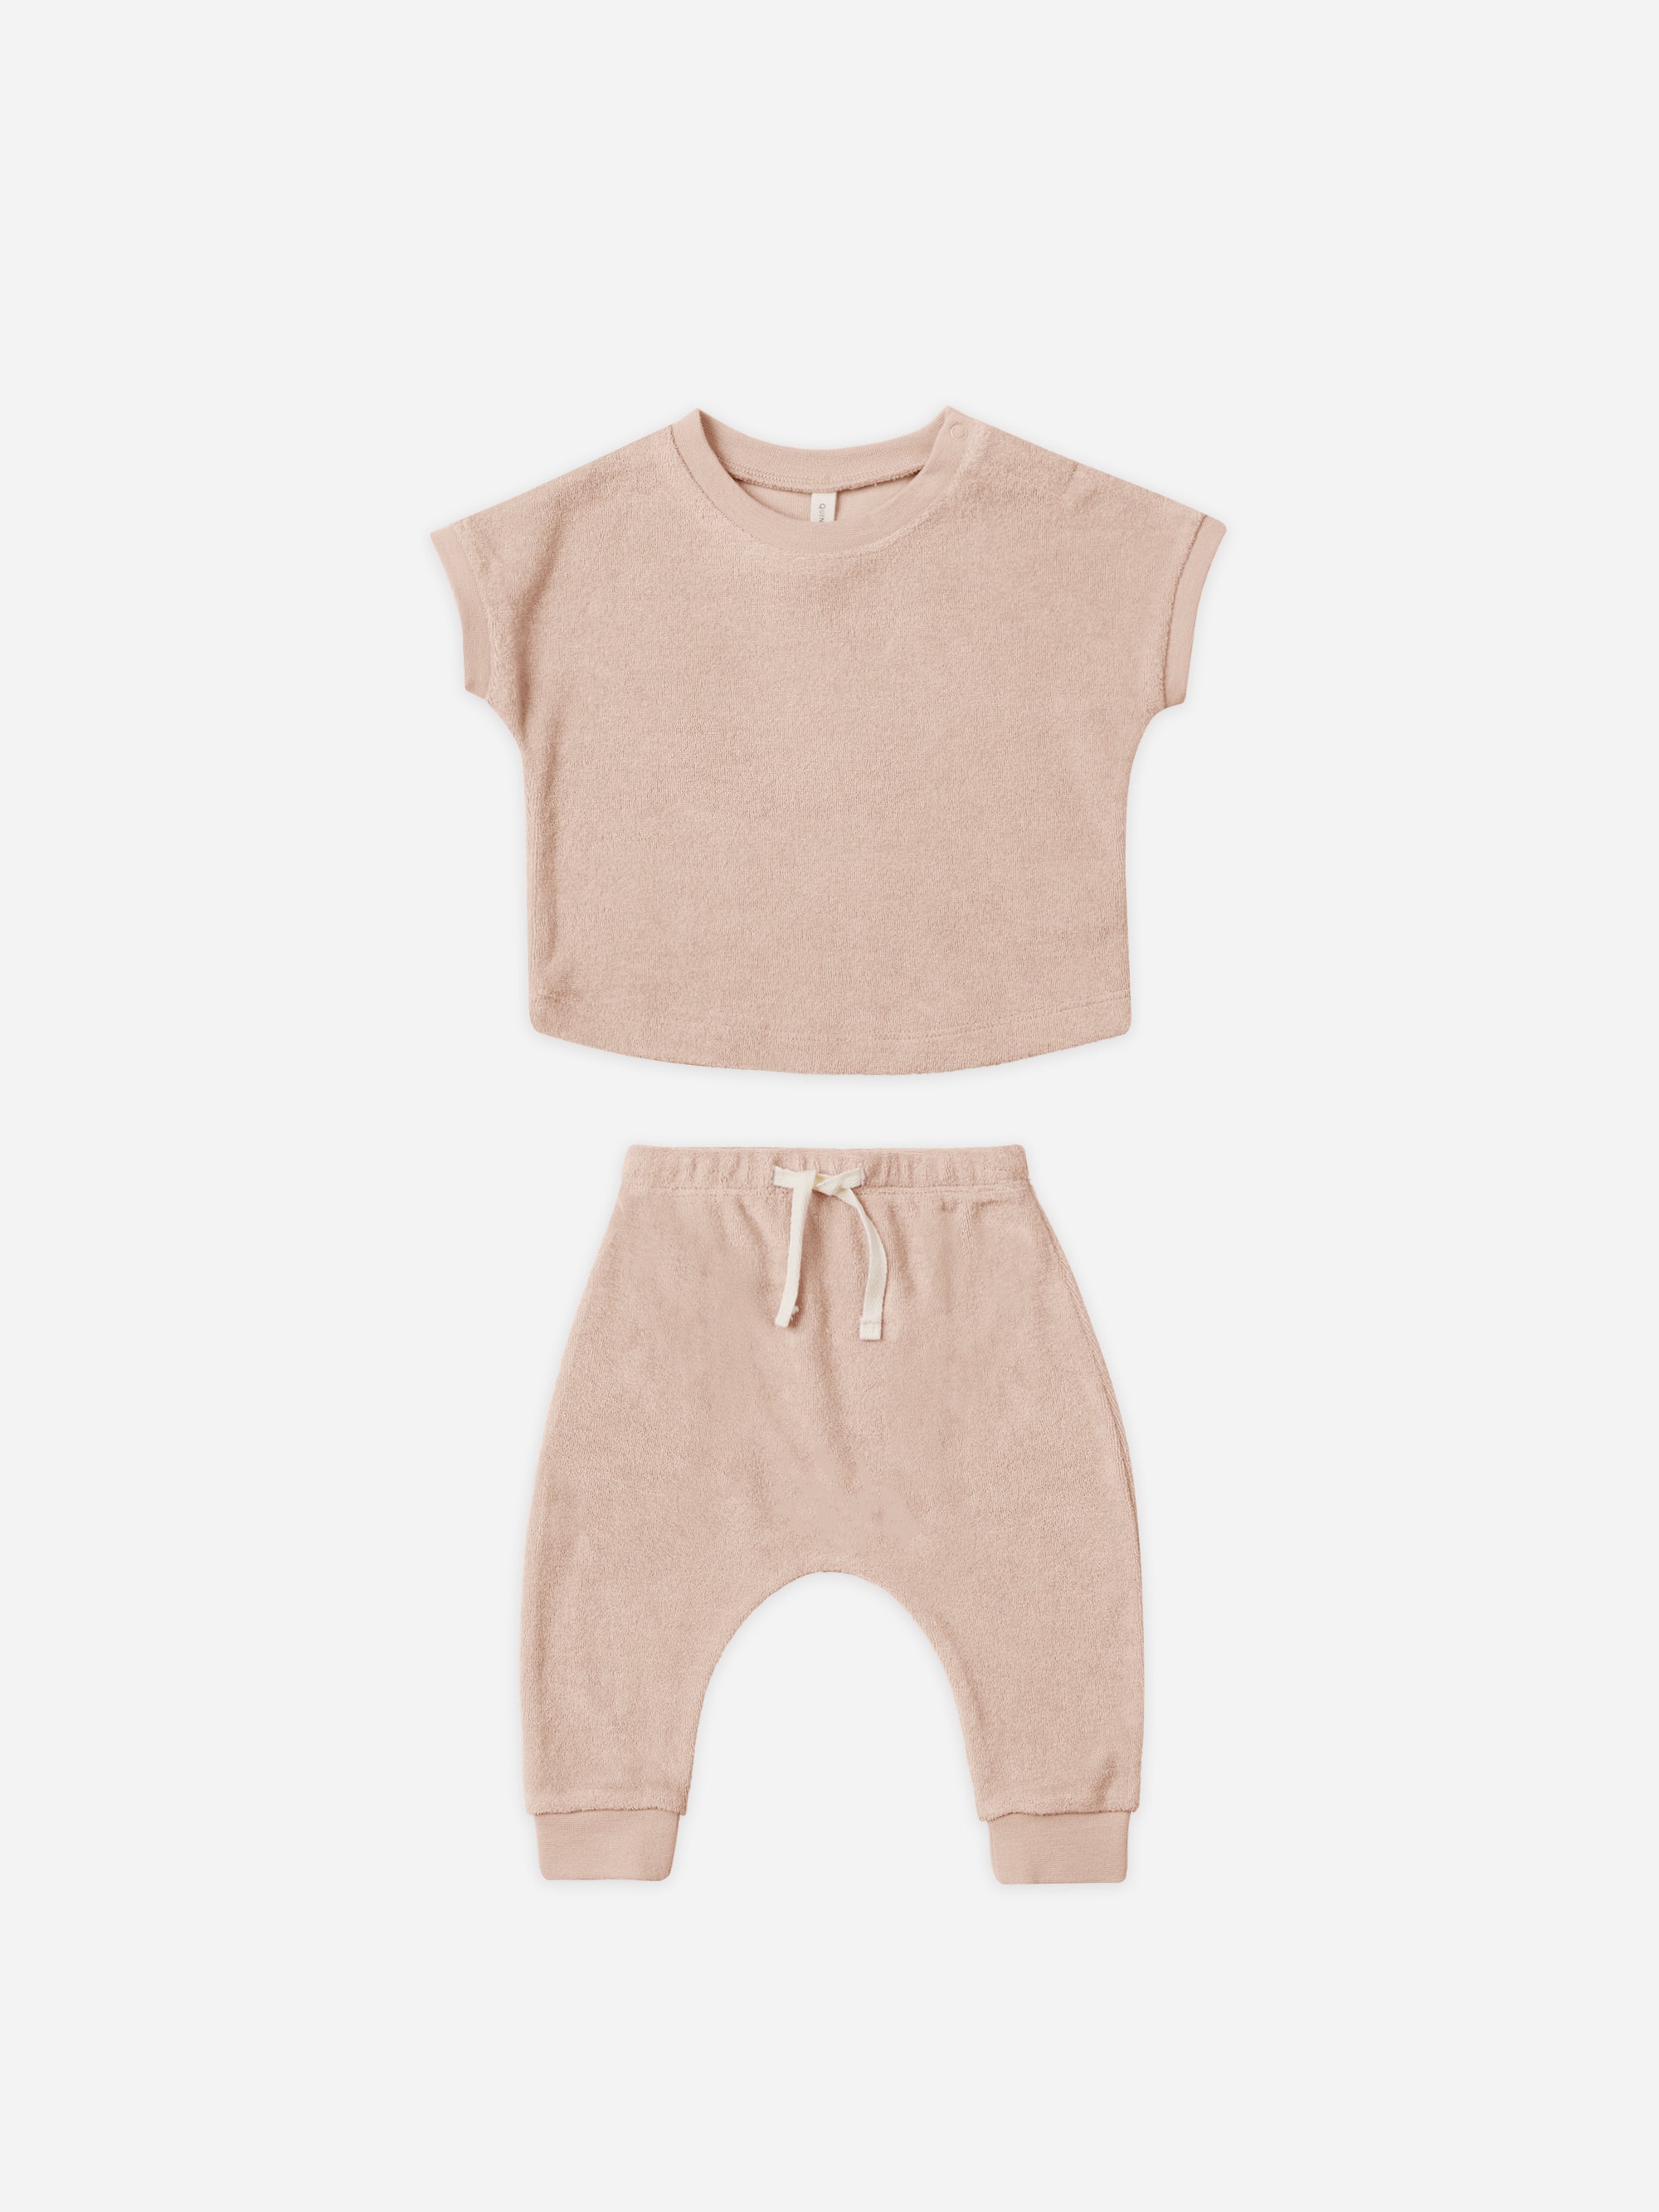 Terry Tee + Pant Set || Blush - Rylee + Cru | Kids Clothes | Trendy Baby Clothes | Modern Infant Outfits |